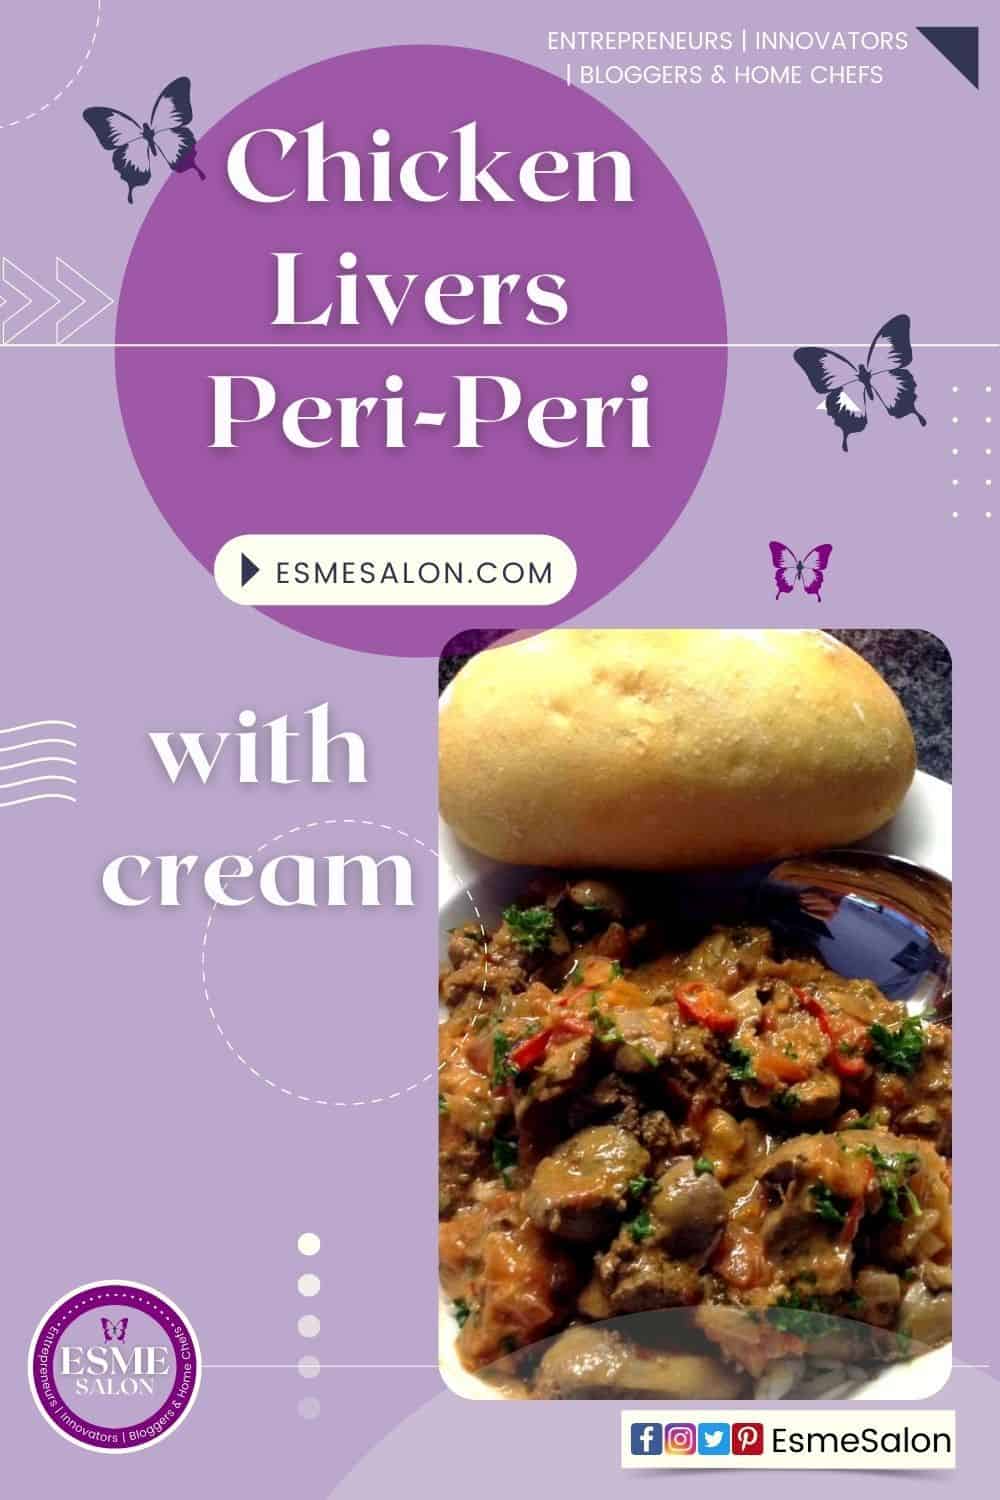 An image of chicken livers in cream with a bread roll on the side